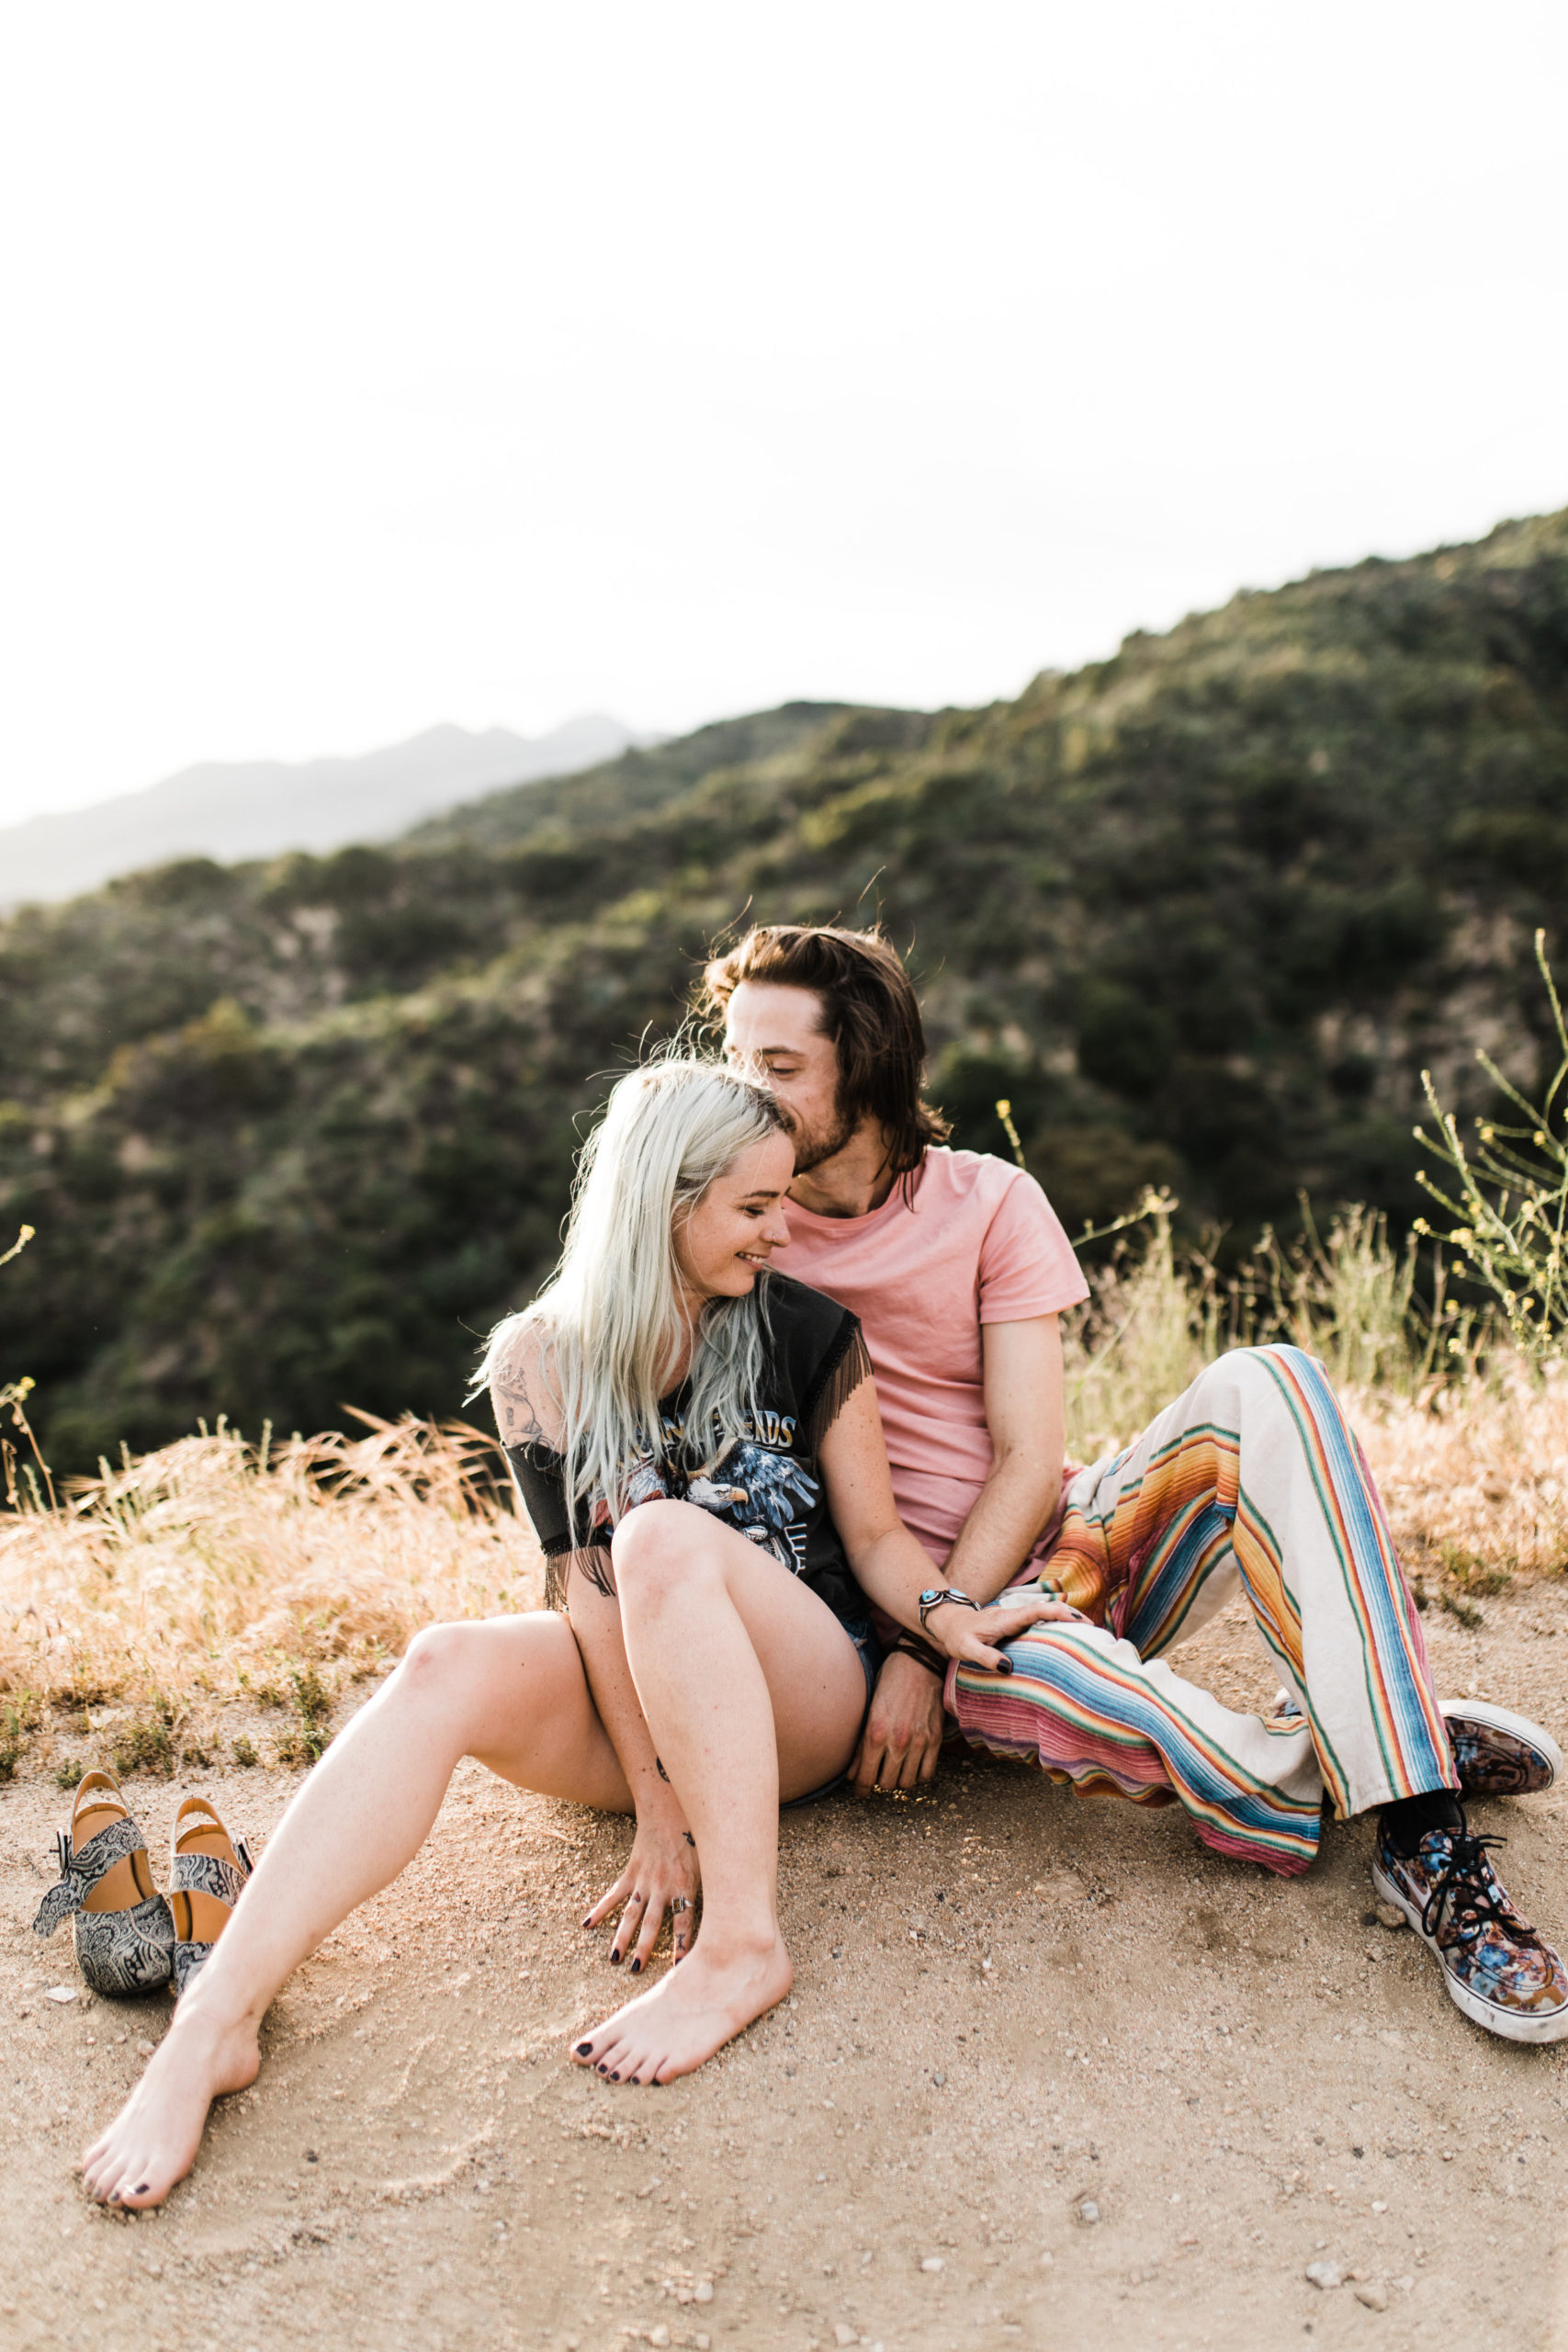 southern california engagement photos locations; couple sitting on the ground laughing while the man kisses the woman on the temple